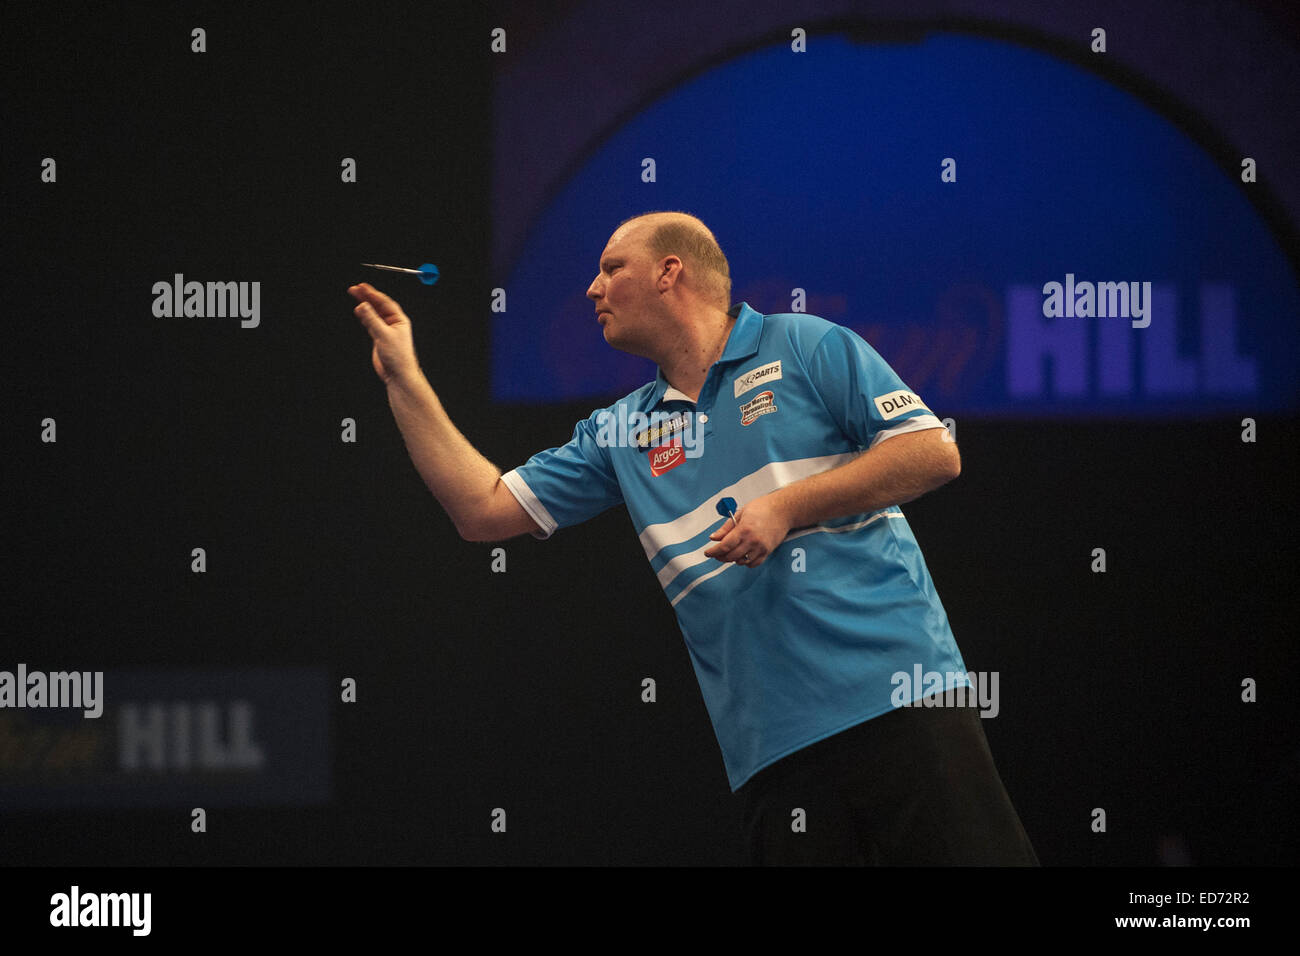 London, UK. 30th Dec, 2014. William Hill PDC World Darts Championship. Vincent van der Voort (23) [NED] in action during his game with Dean Winstanley (26) [ENG]. Vincent van der Voort won the match 4-2. © Action Plus Sports/Alamy Live News Stock Photo